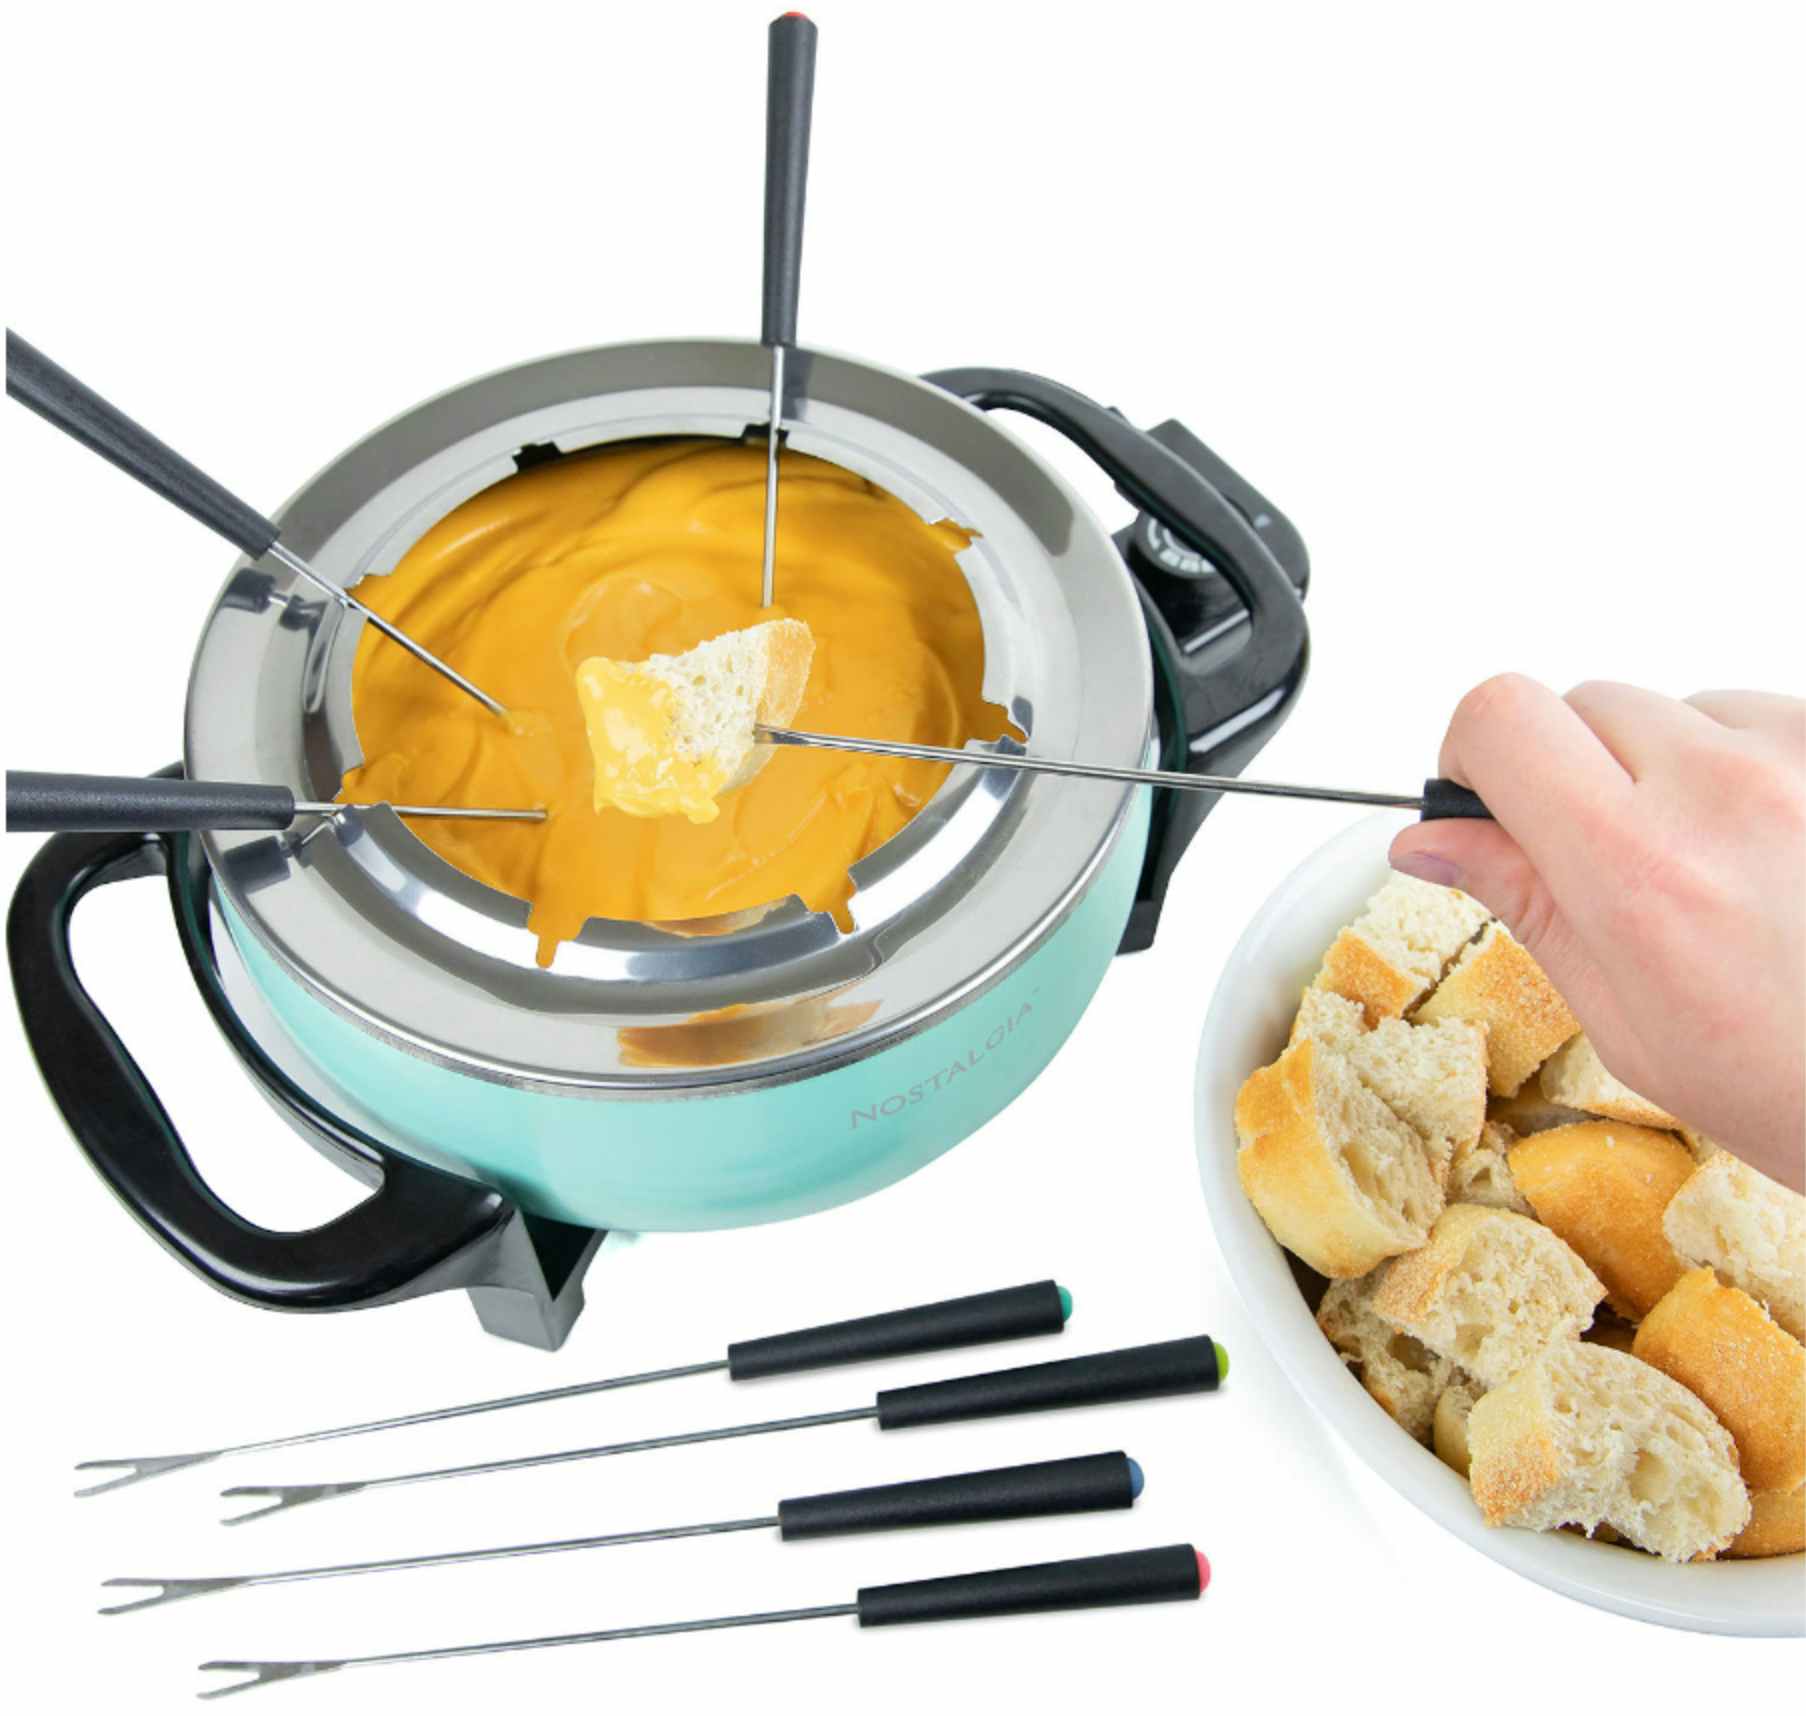 someone dipping bread into cheese fondue